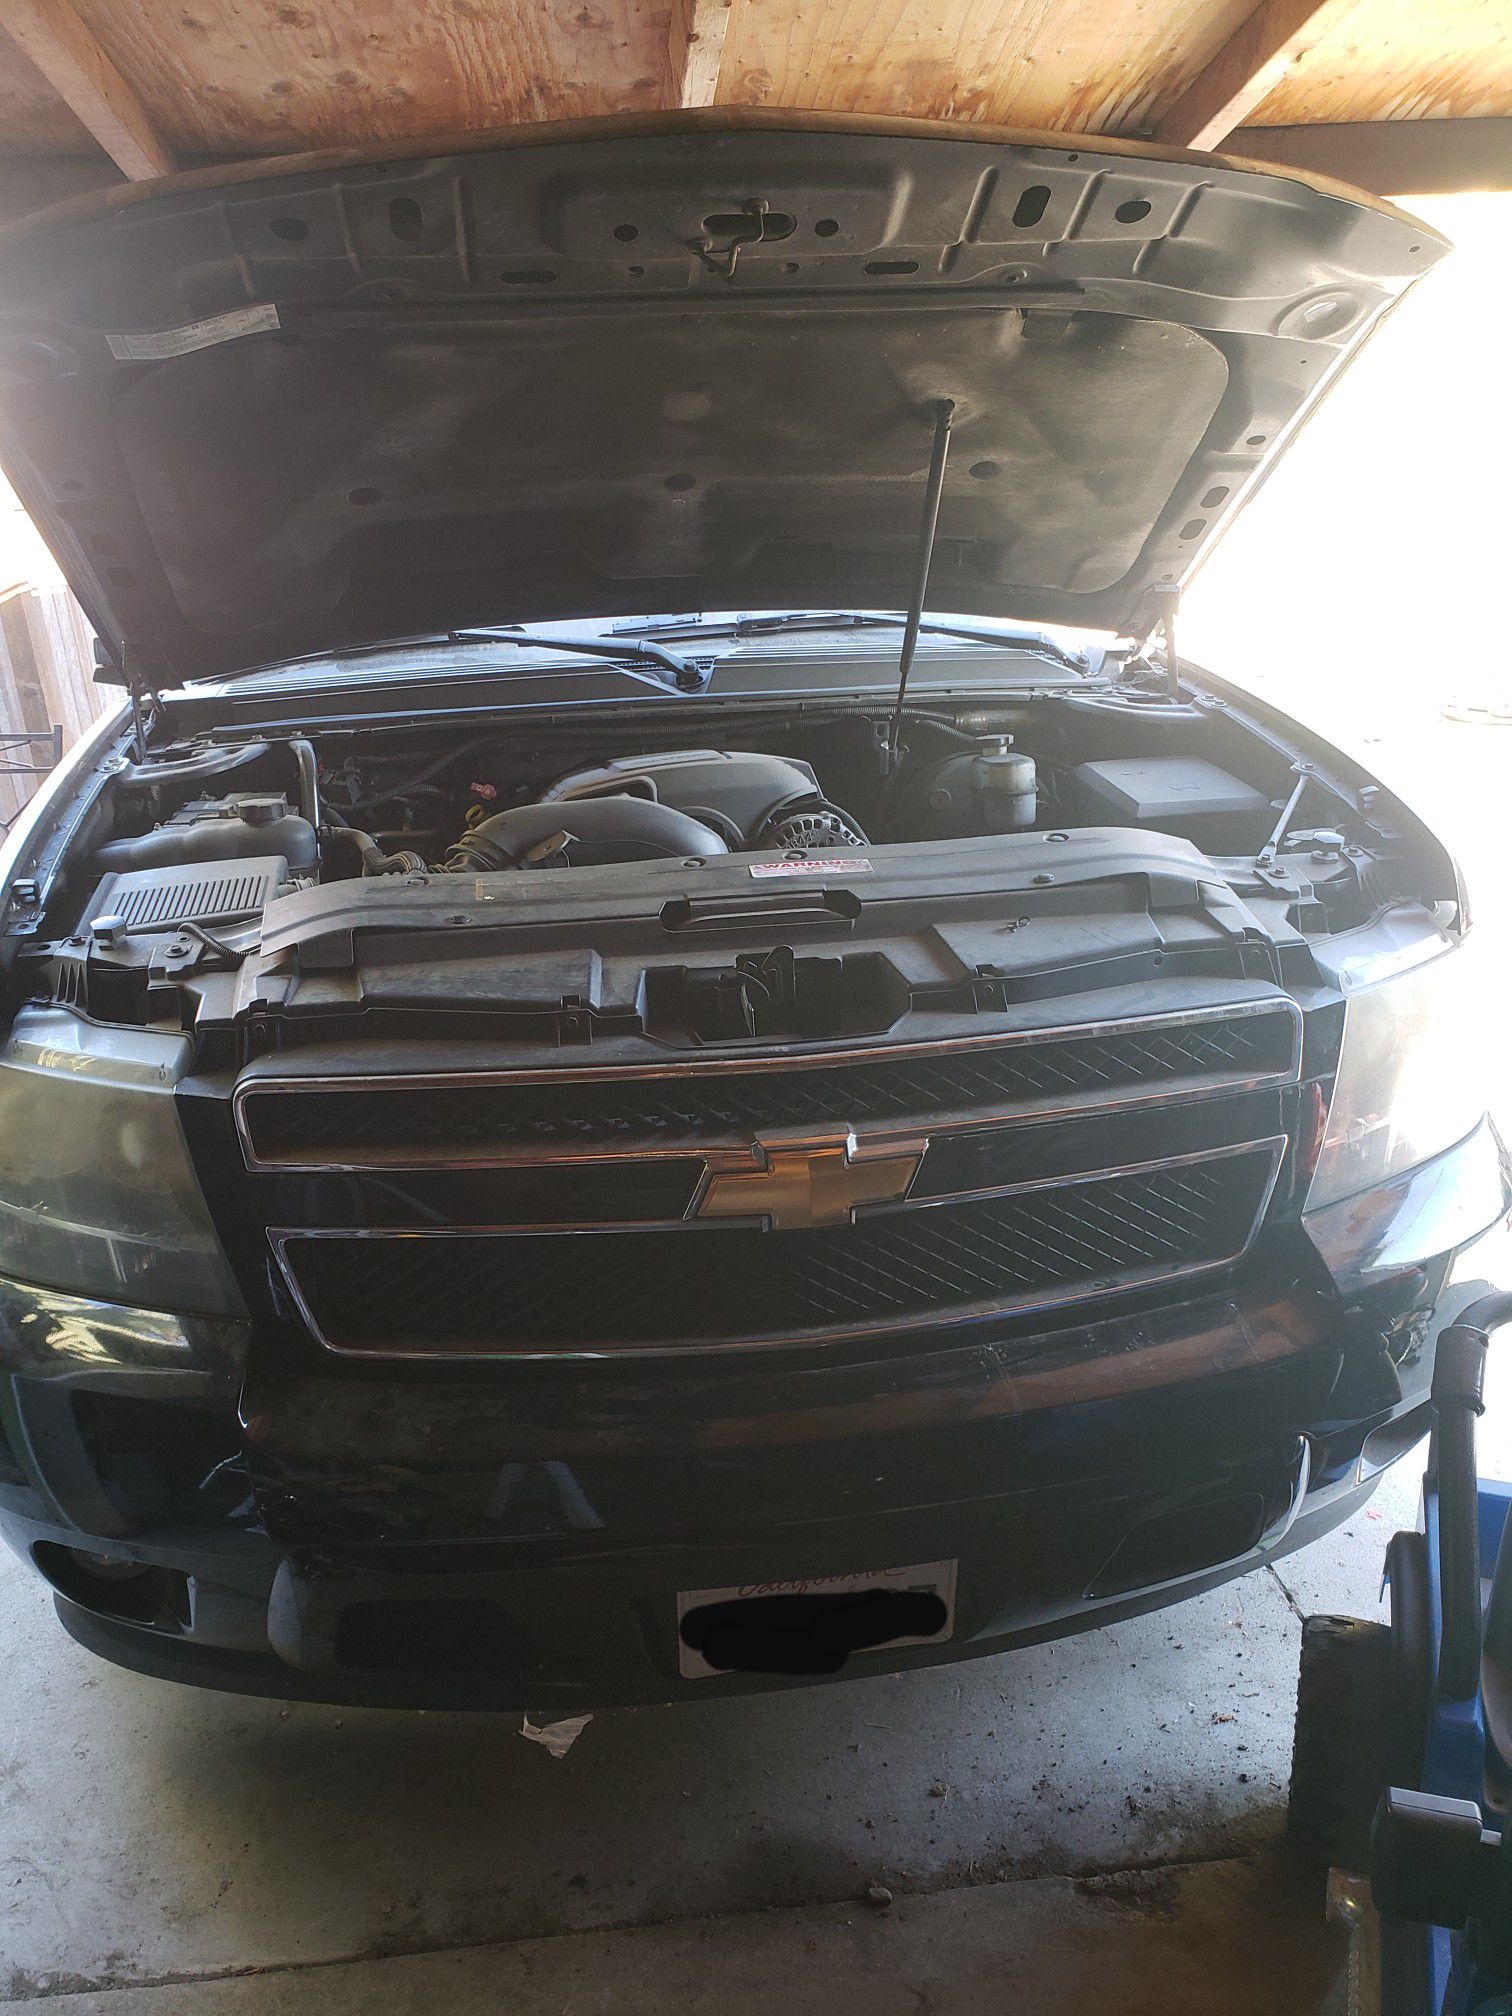 Chevy tahoe parting out engine in good condition all parts